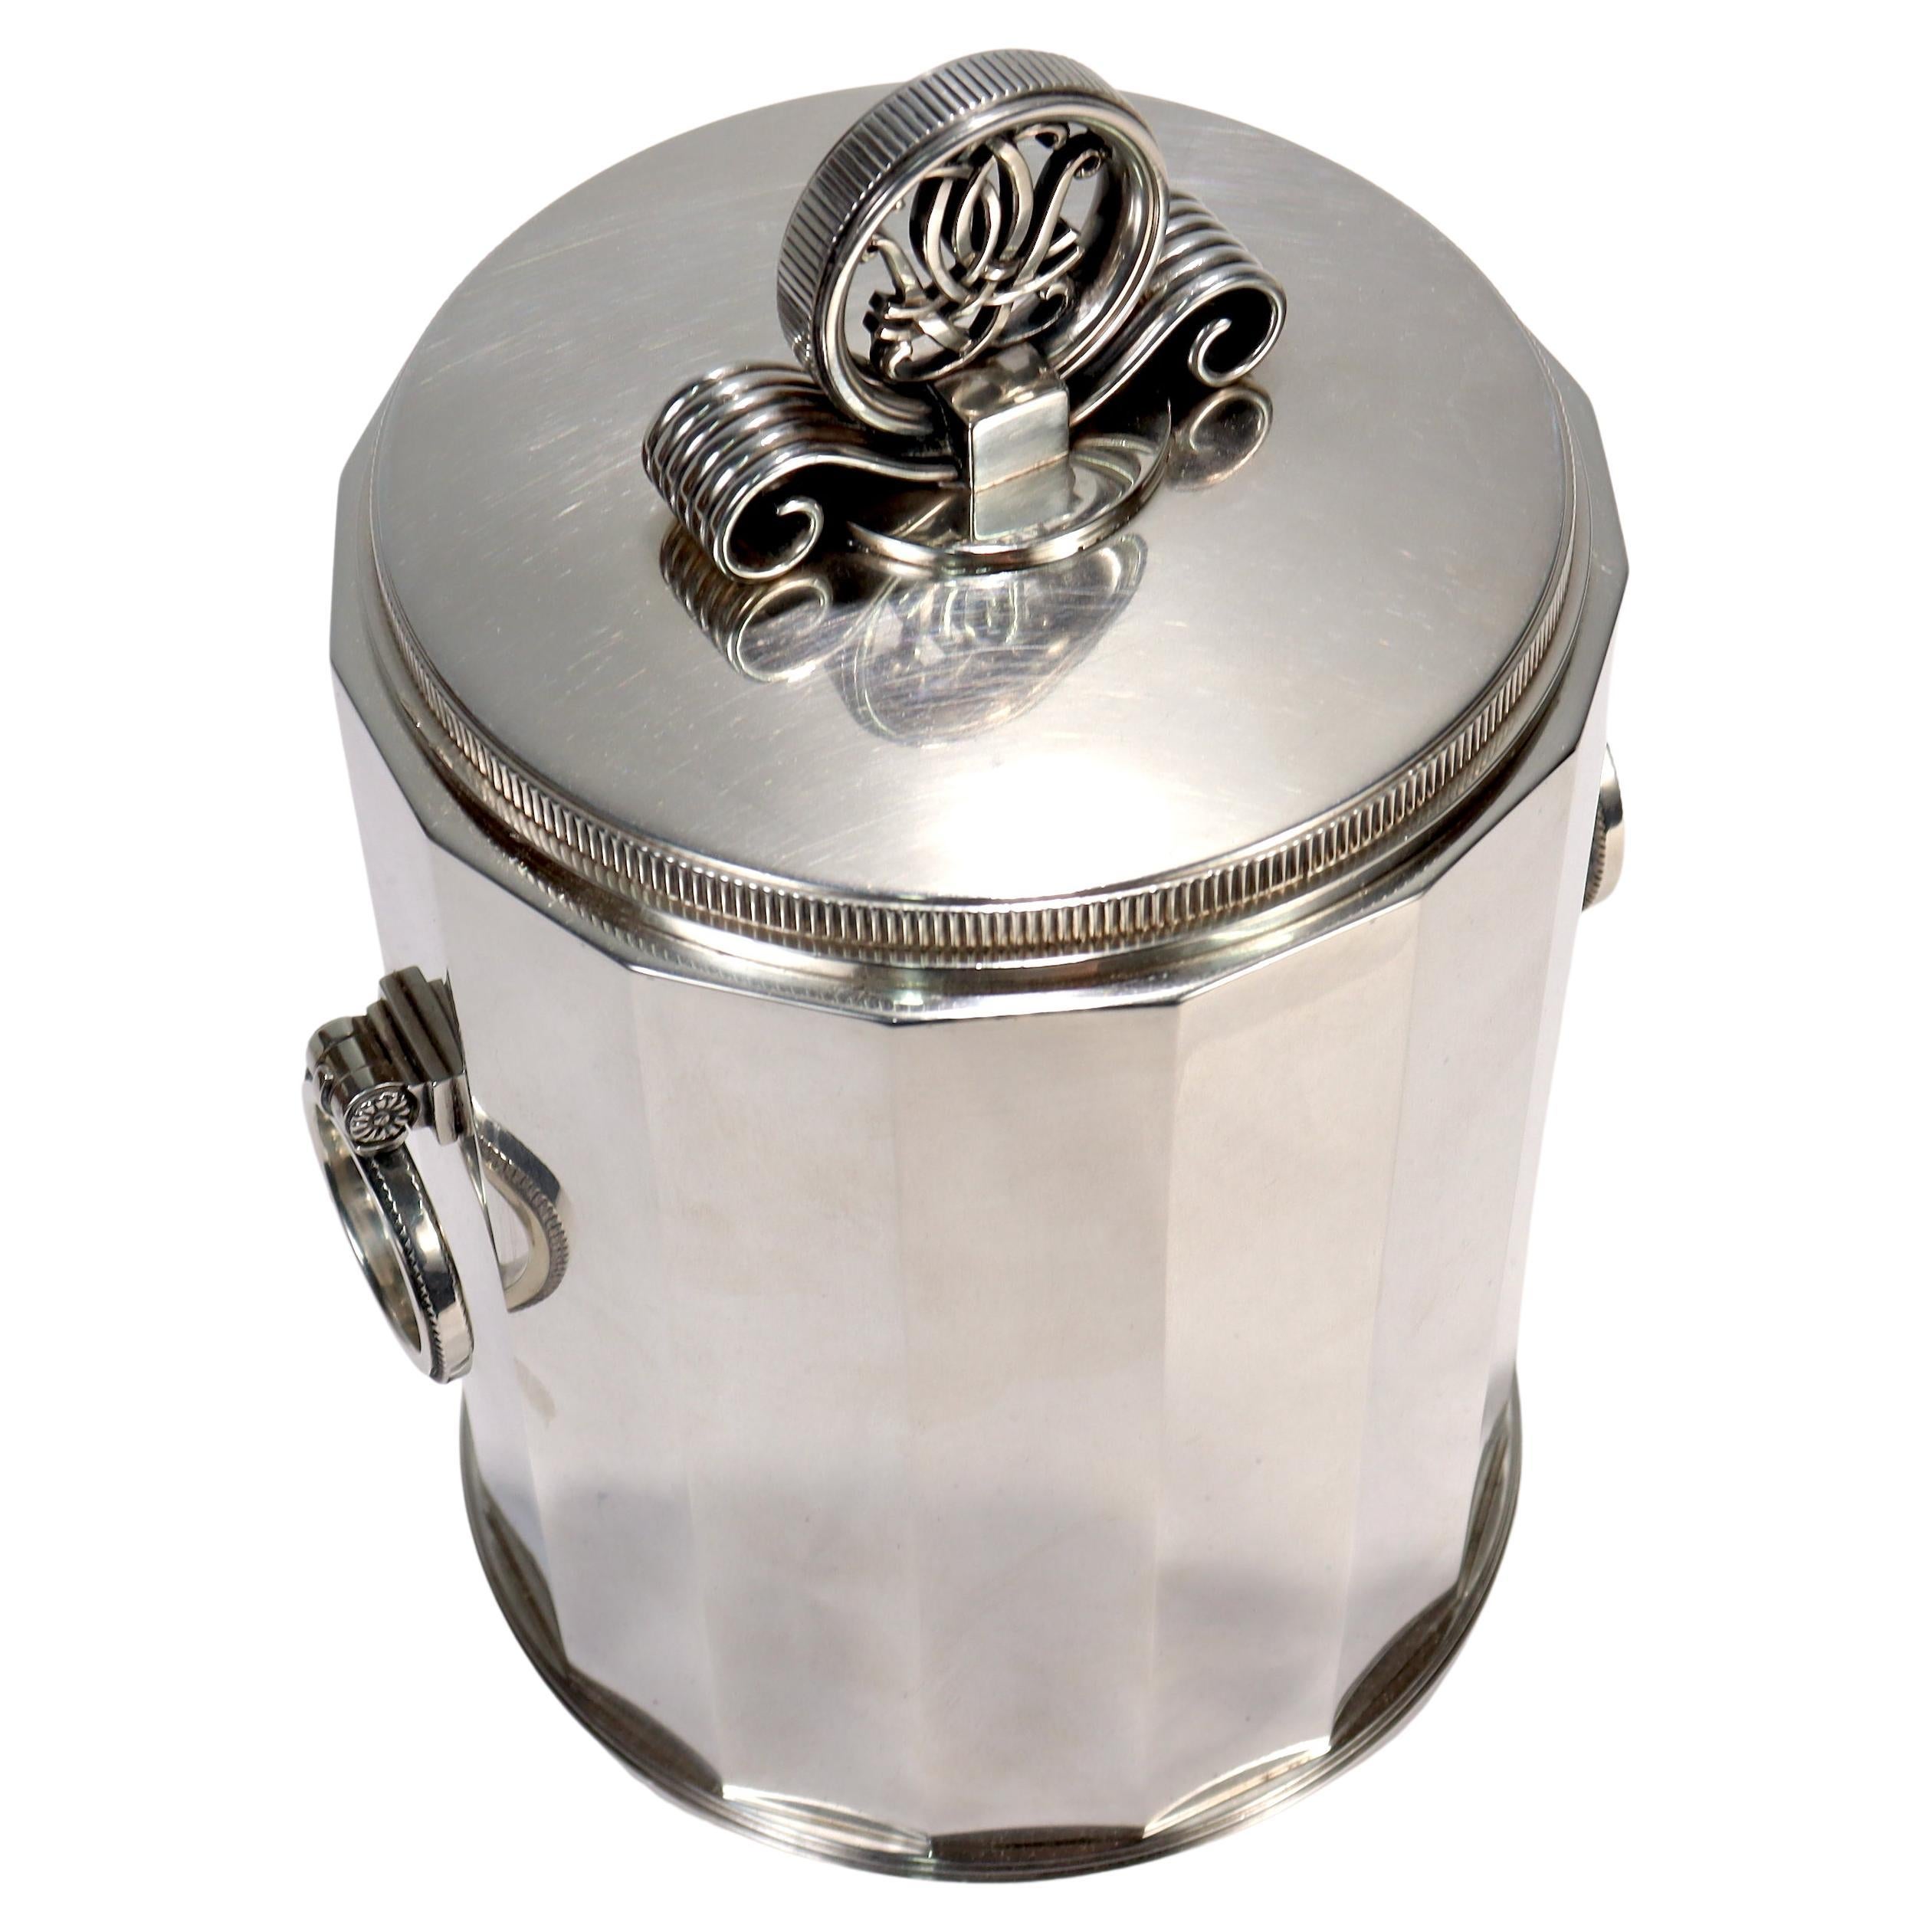 A fine antique humidor or canister. 

In sterling silver. 

Designed by Erik Fleming for Borgila in the 1940's.

With a stepped foot, faceted body, loop twin handles to the sides, and a tightly sealed confrming lid with an Art Deco finial. 

The